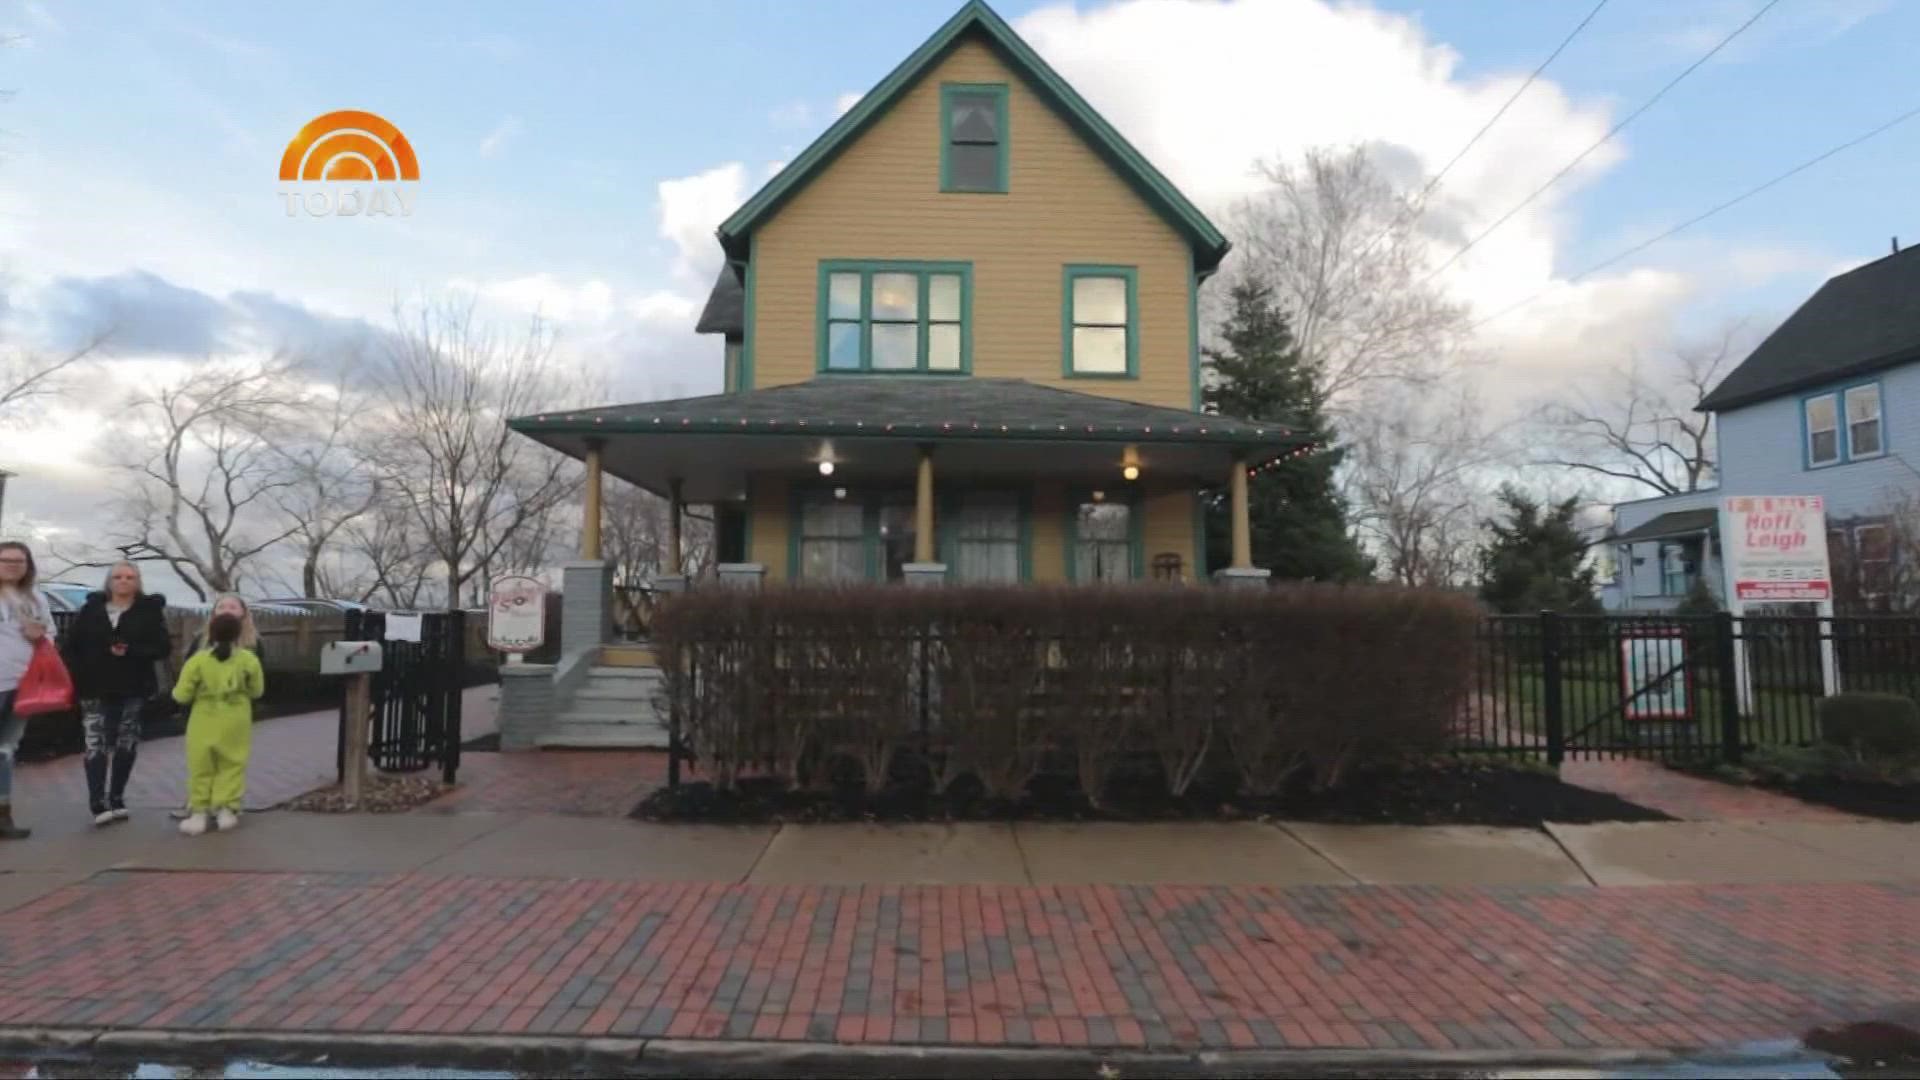 The TODAY show is in Cleveland to shine a national spotlight on the house from 'A Christmas Story' as the iconic property is up for sale.